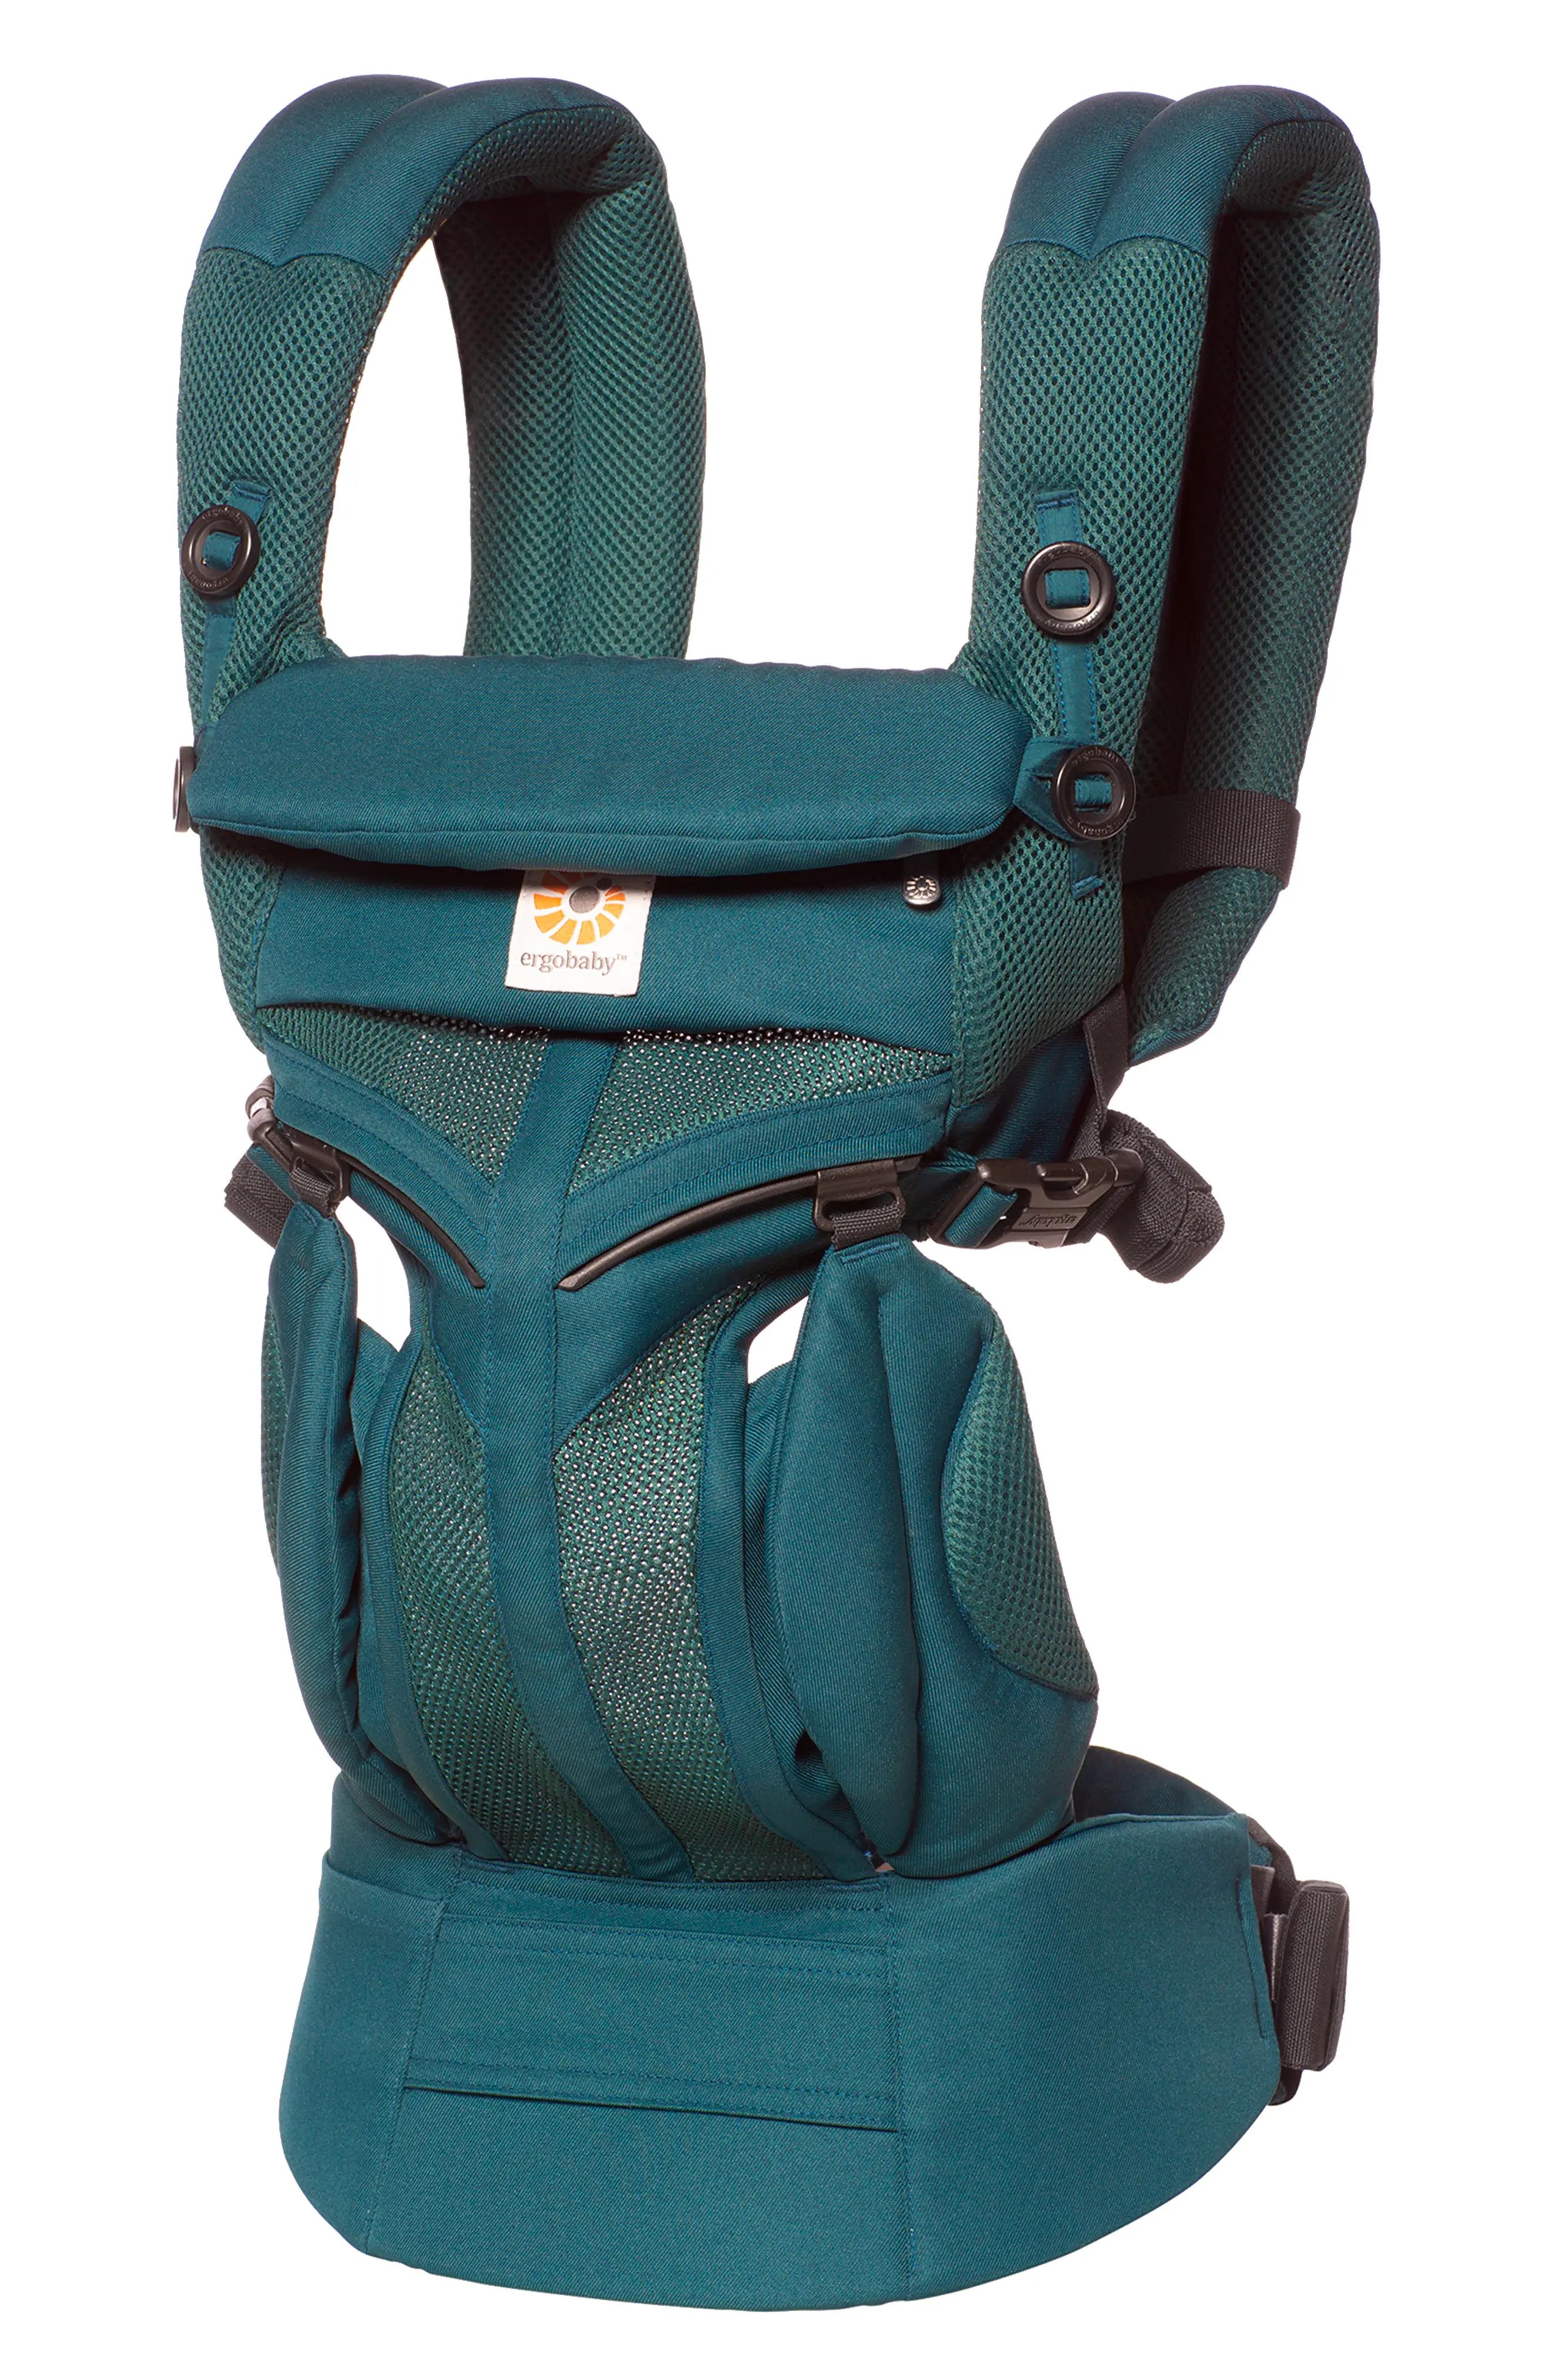 ERGObaby Omni 360 Cool Air Baby Carrier in Evergreen at Nordstrom | Nordstrom